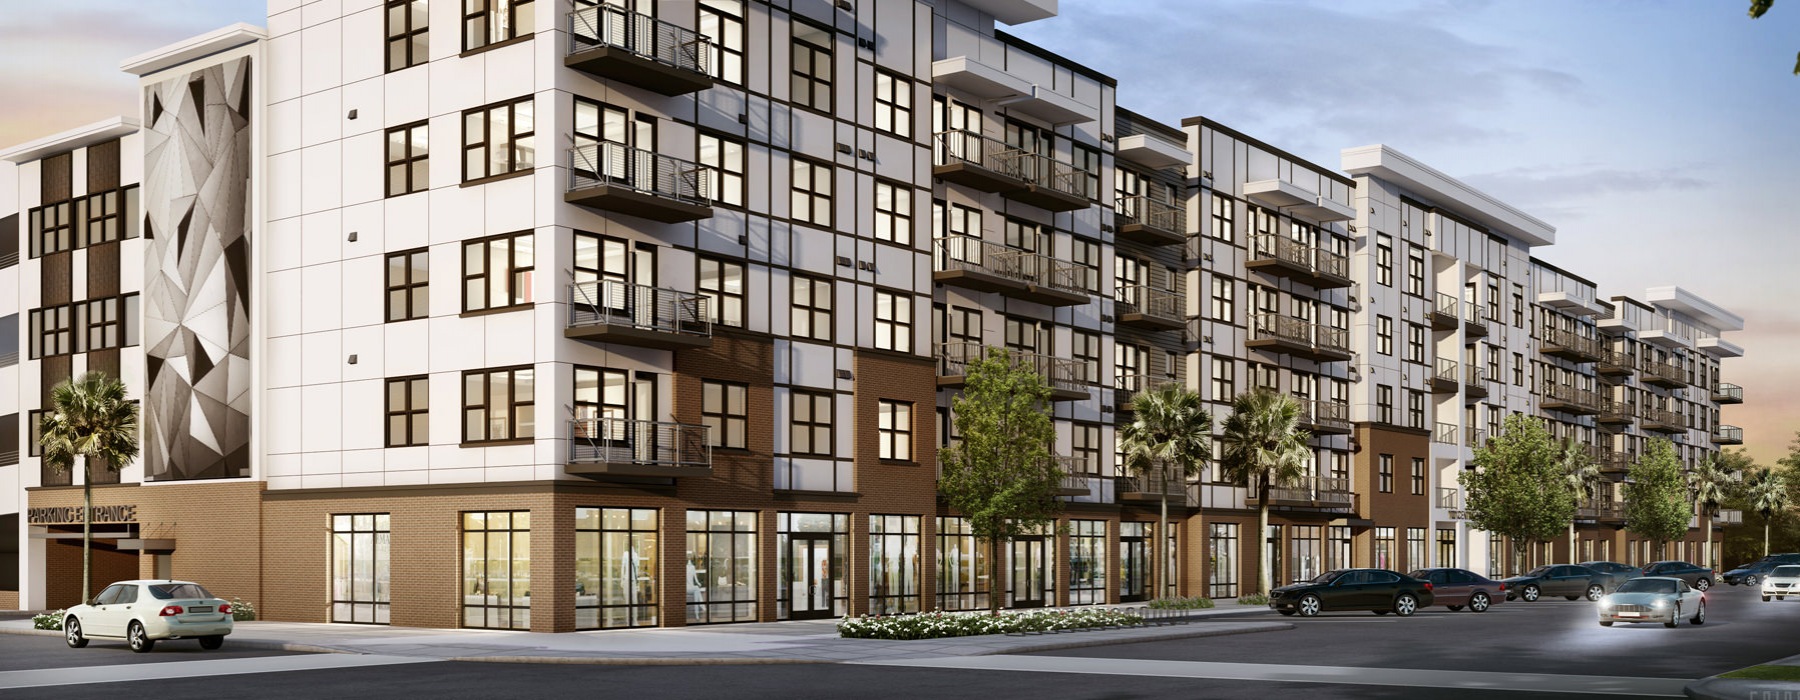 Exterior rendering shows 5 stories